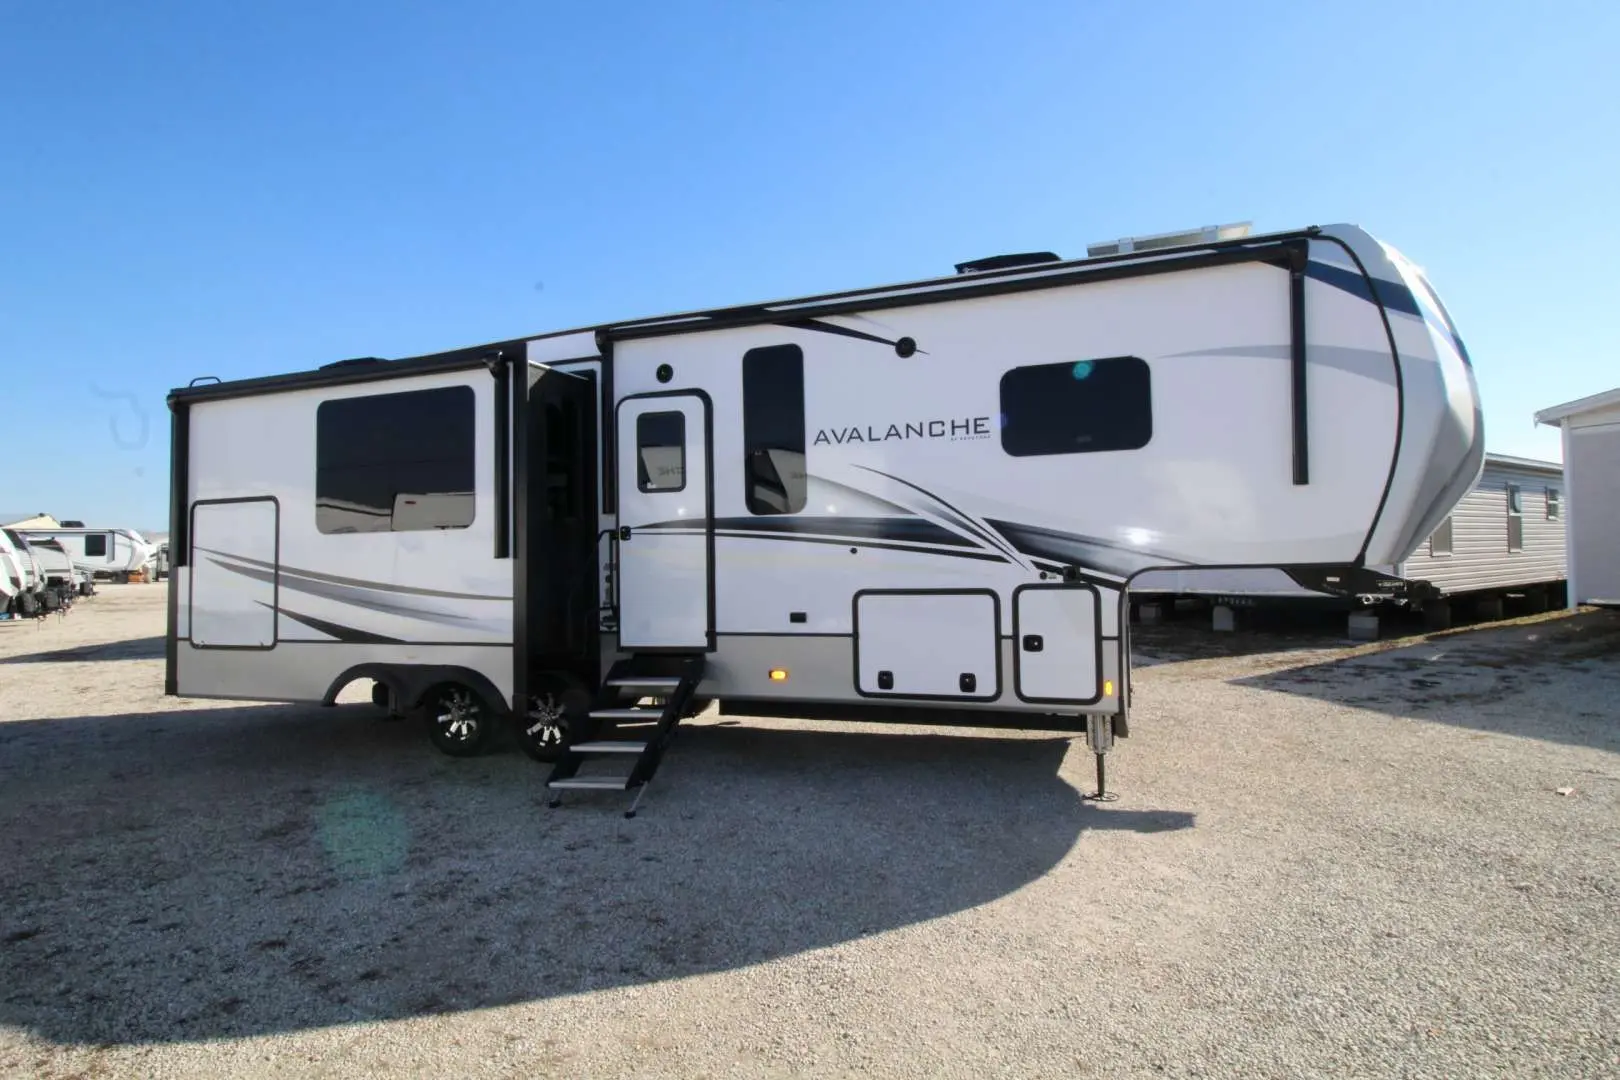 Avalanche Fifth Wheel